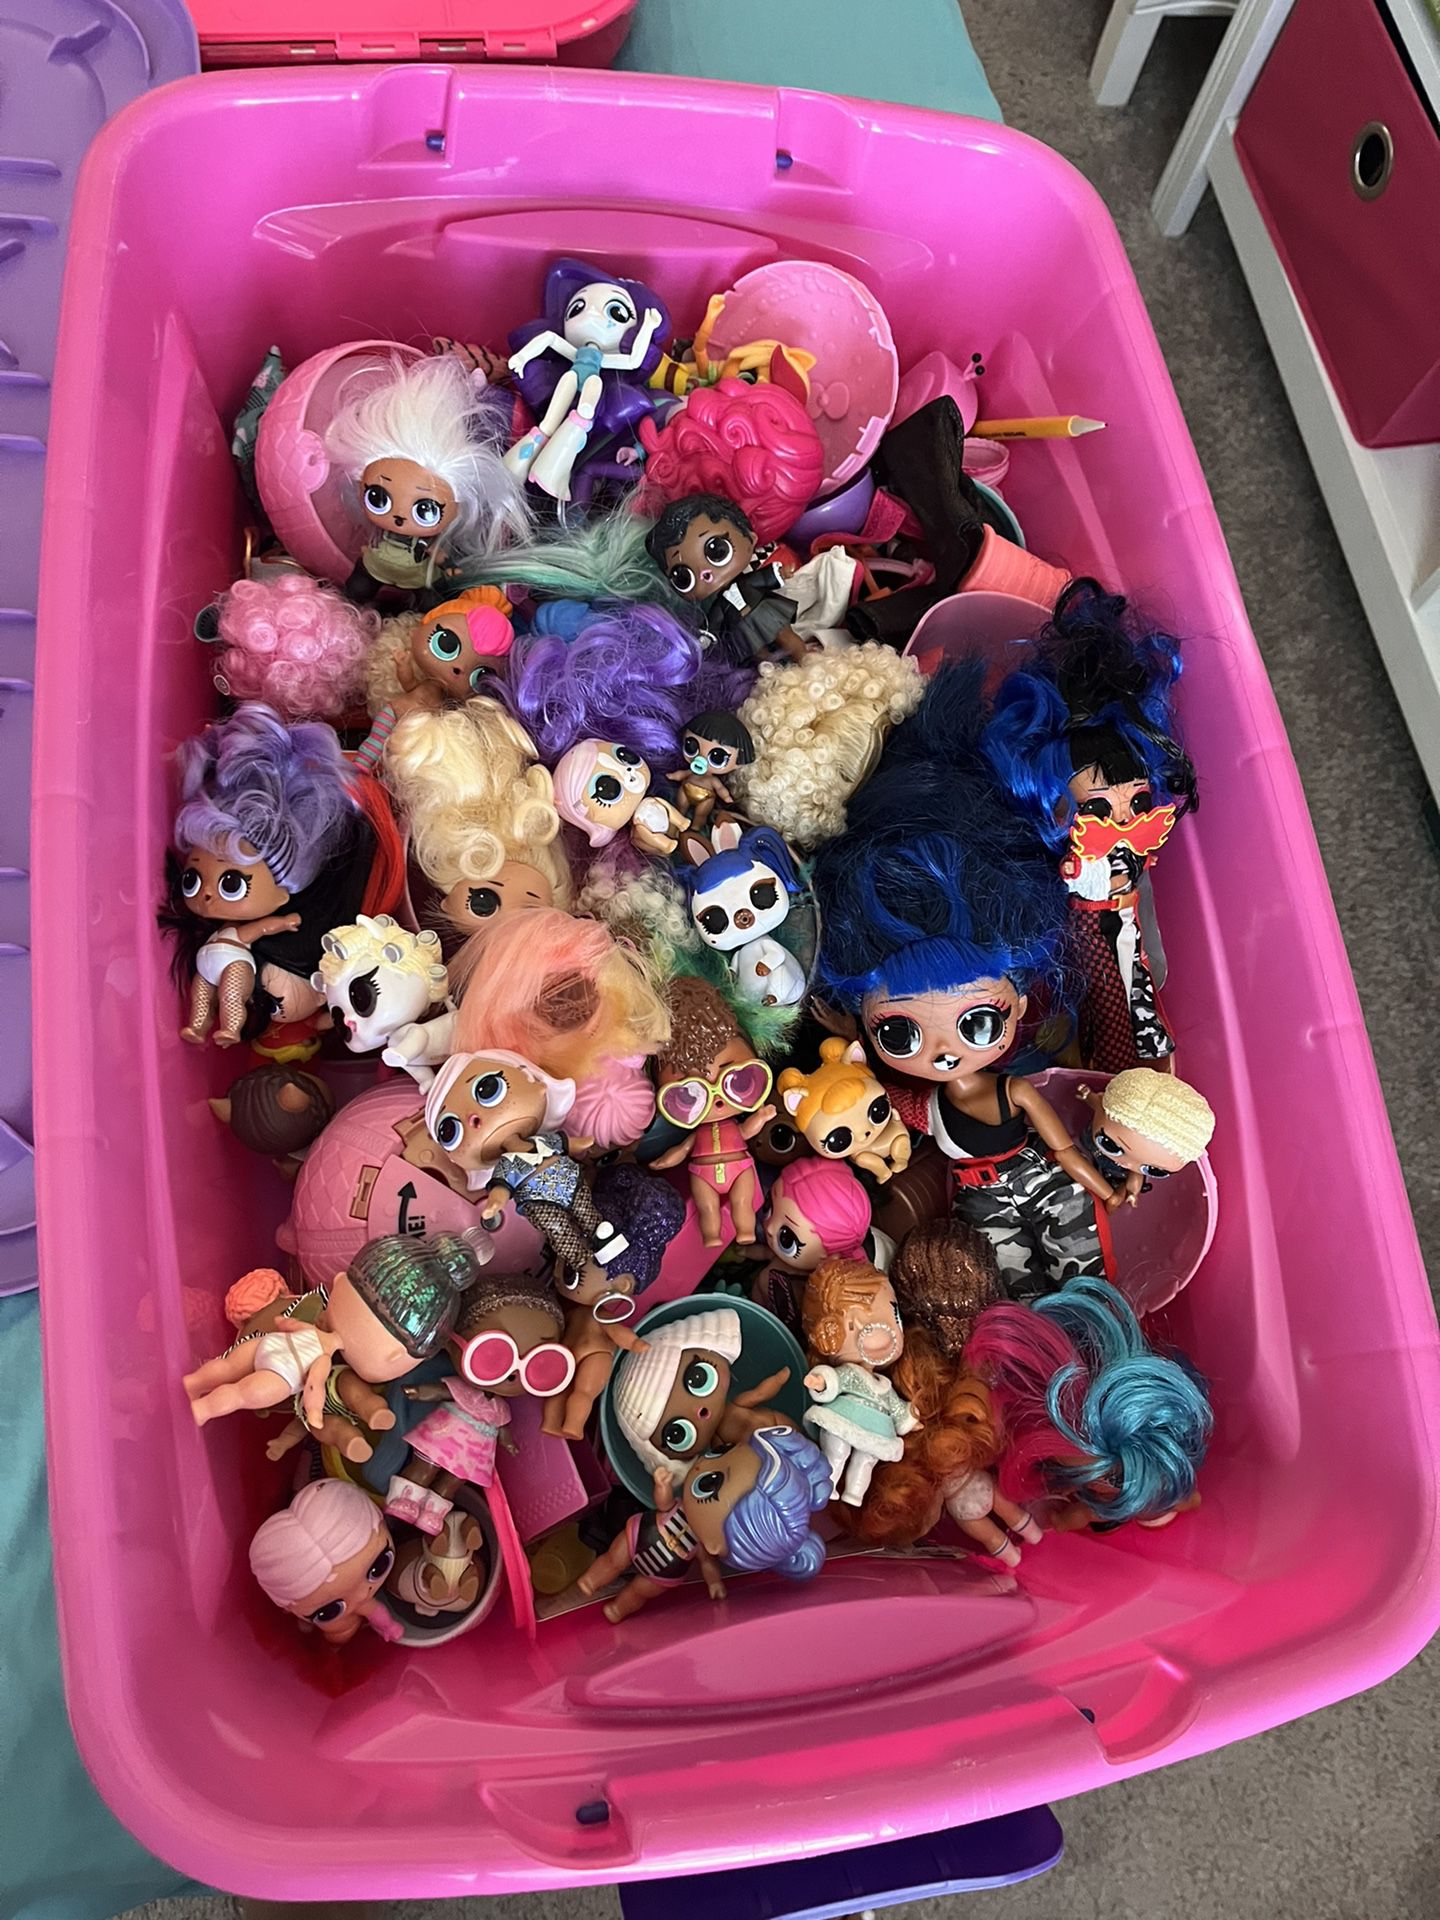 40 LOL SURPISE DOLLS AND CLOTHES 